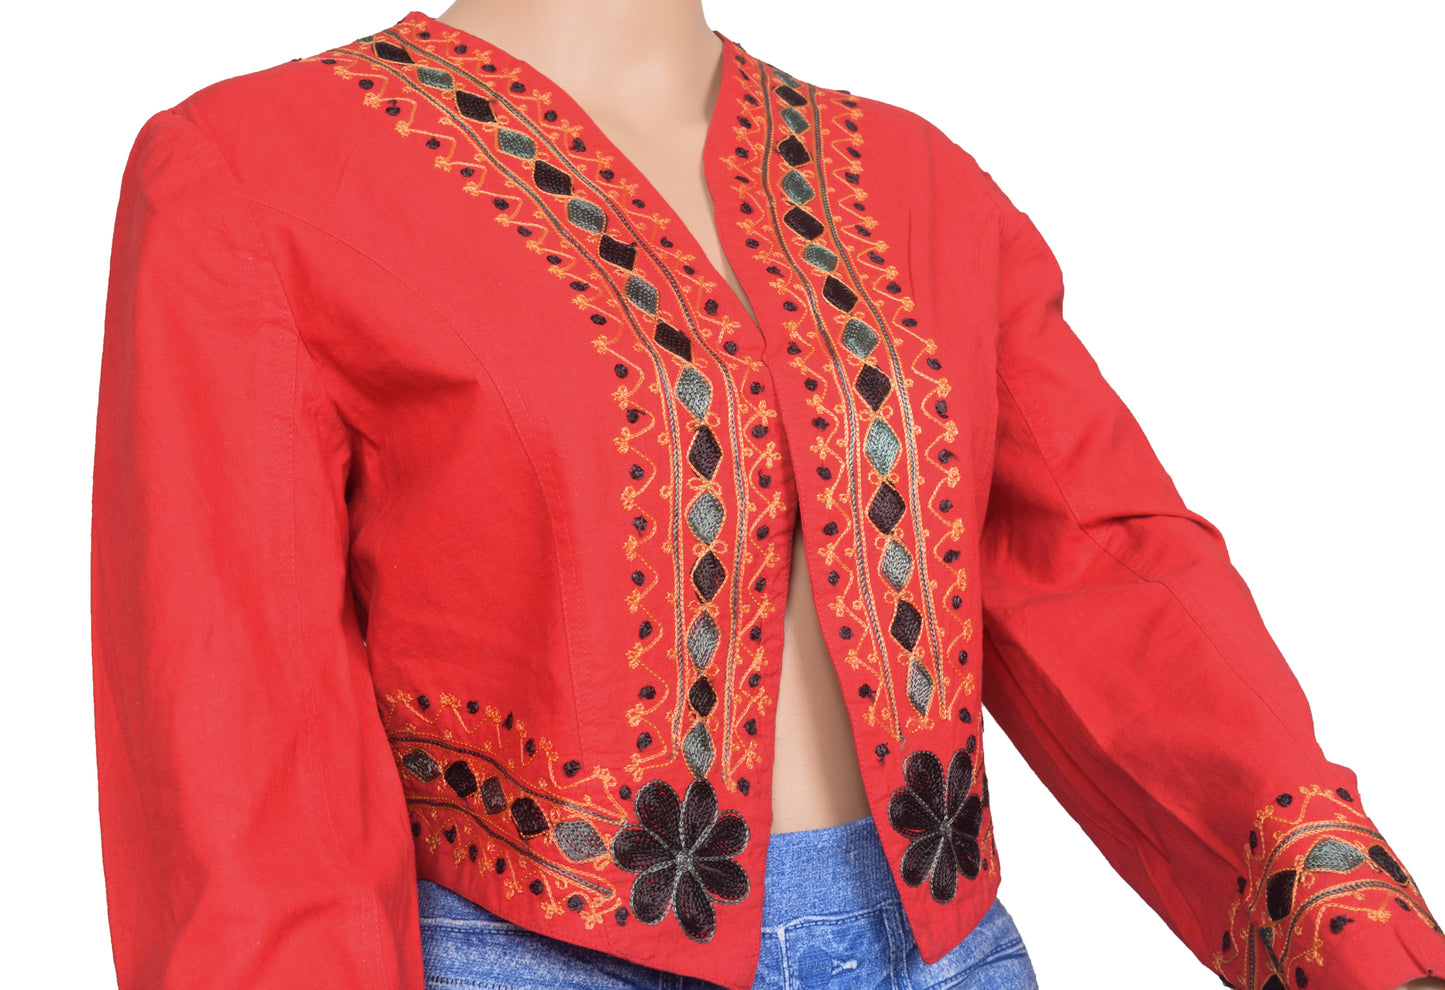 Vintage Red Stitched Puff Sleeve Sari Blouse Cotton Embroidered Waist Coat Top